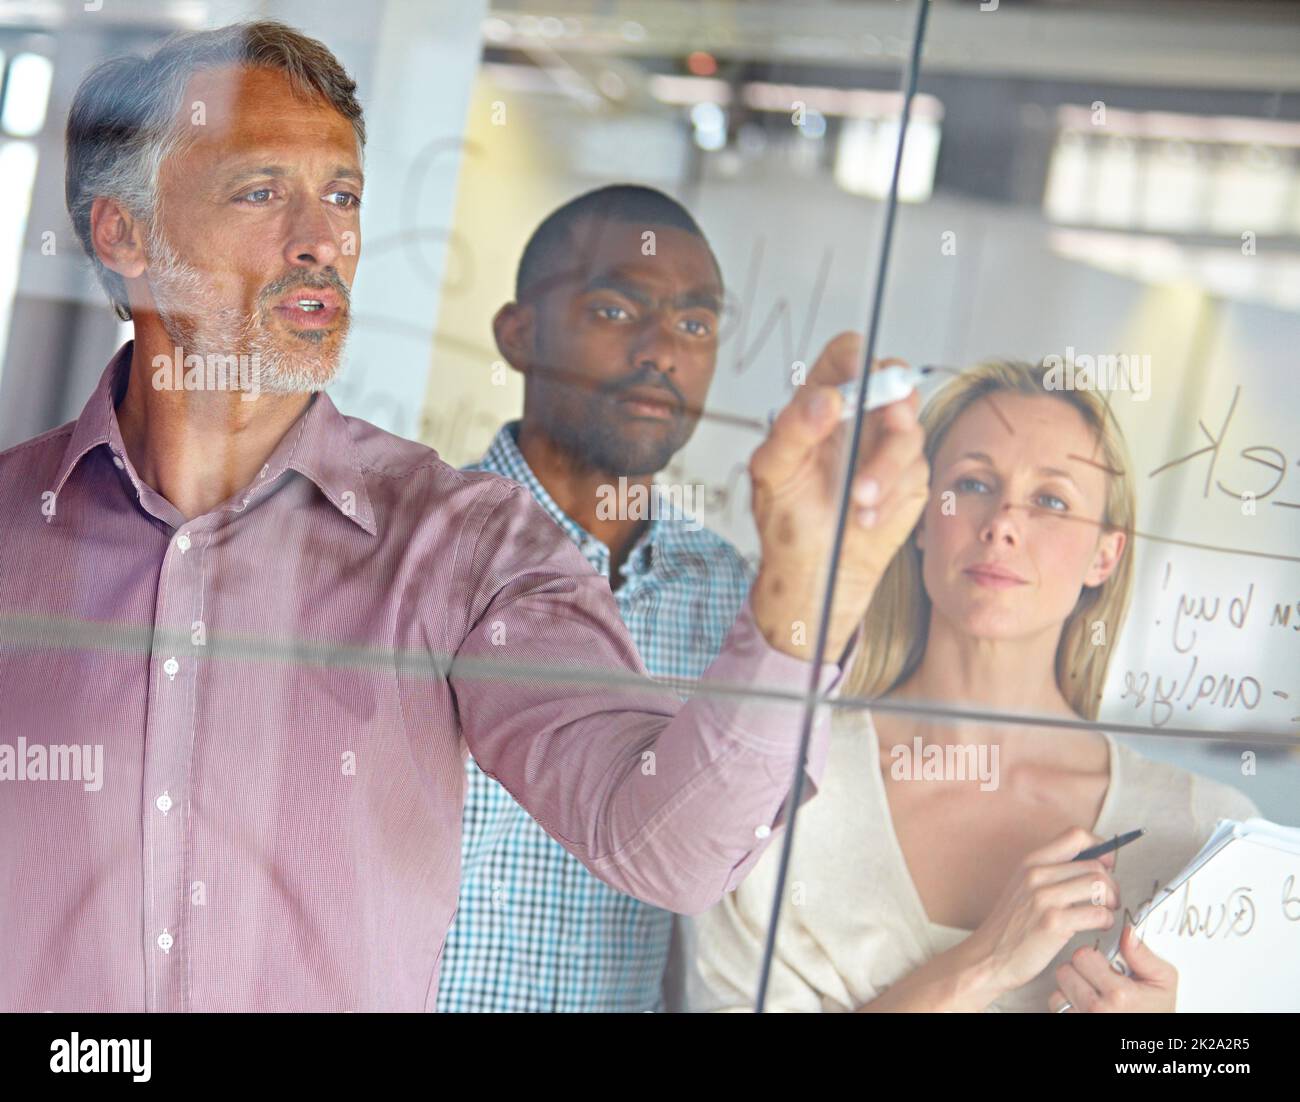 Hes a man with a plan. A mature businessman writing down plans on a glass pane while his colleagues look on. Stock Photo